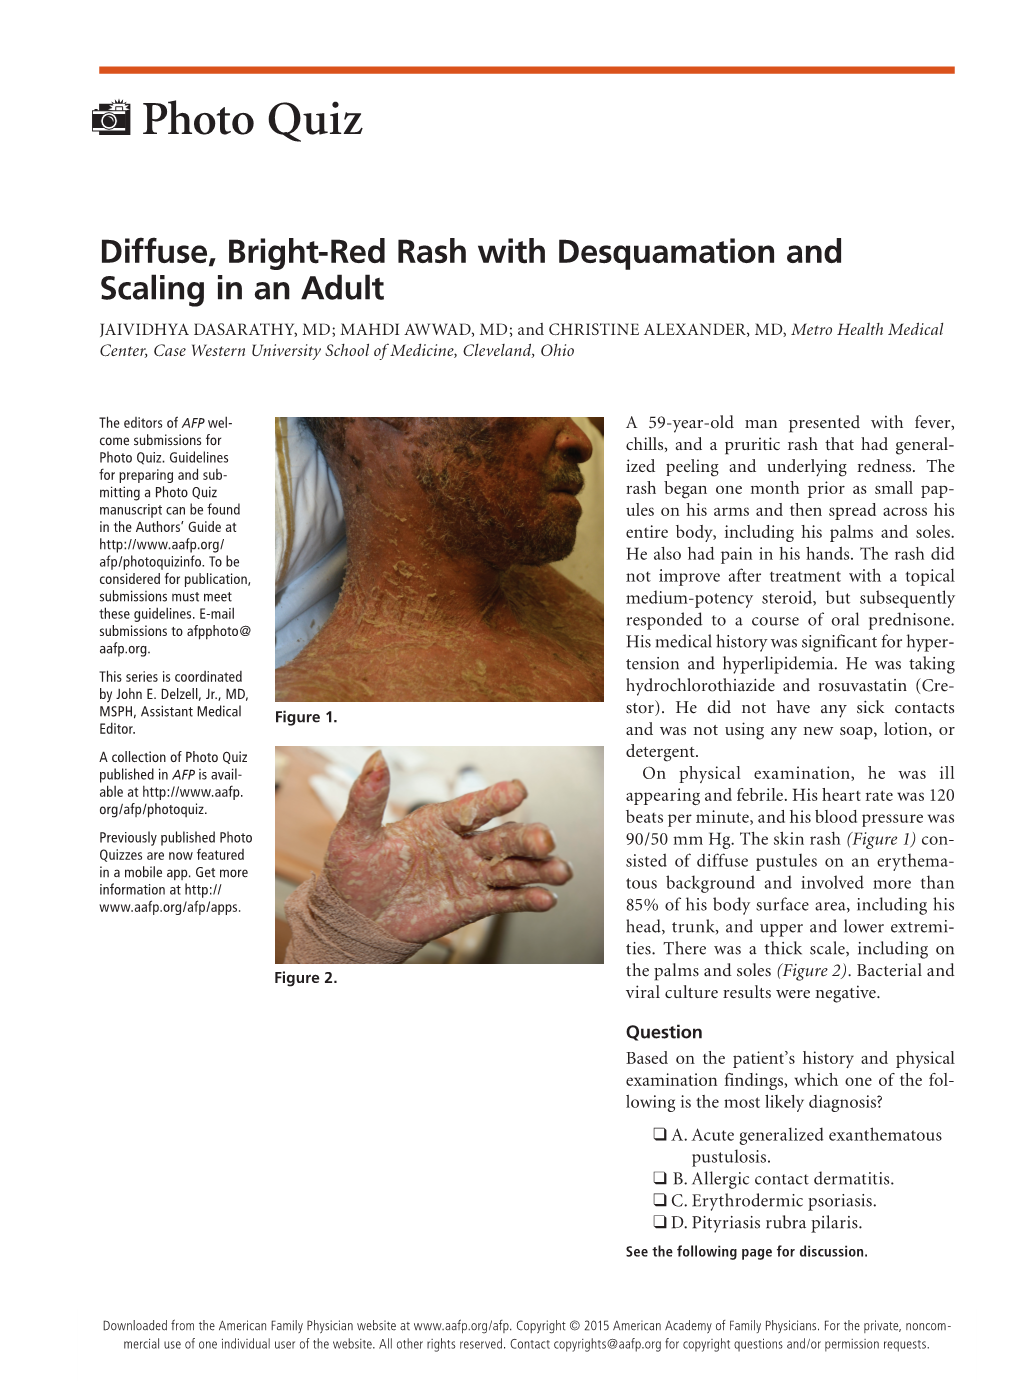 Diffuse, Bright-Red Rash with Desquamation and Scaling in An